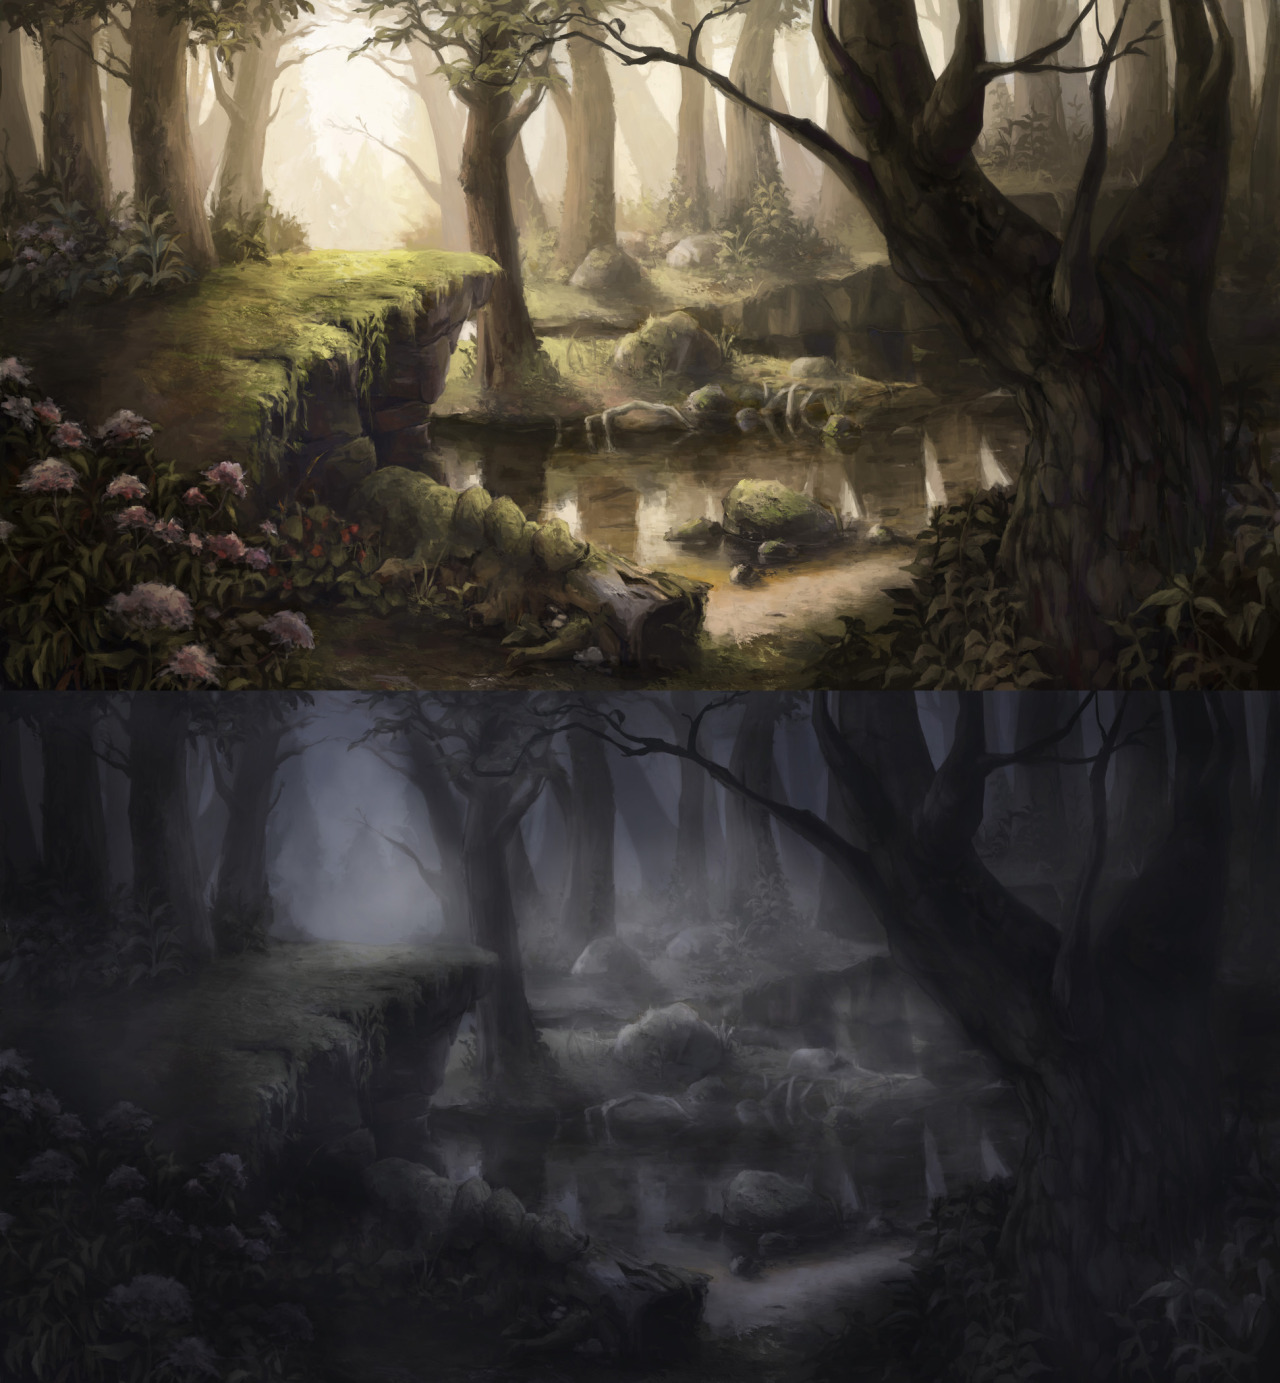 Day and night forest scene painted in photoshop!Feel free to follow me at missmaaike.tumblr.com for more art! Thank you! :D